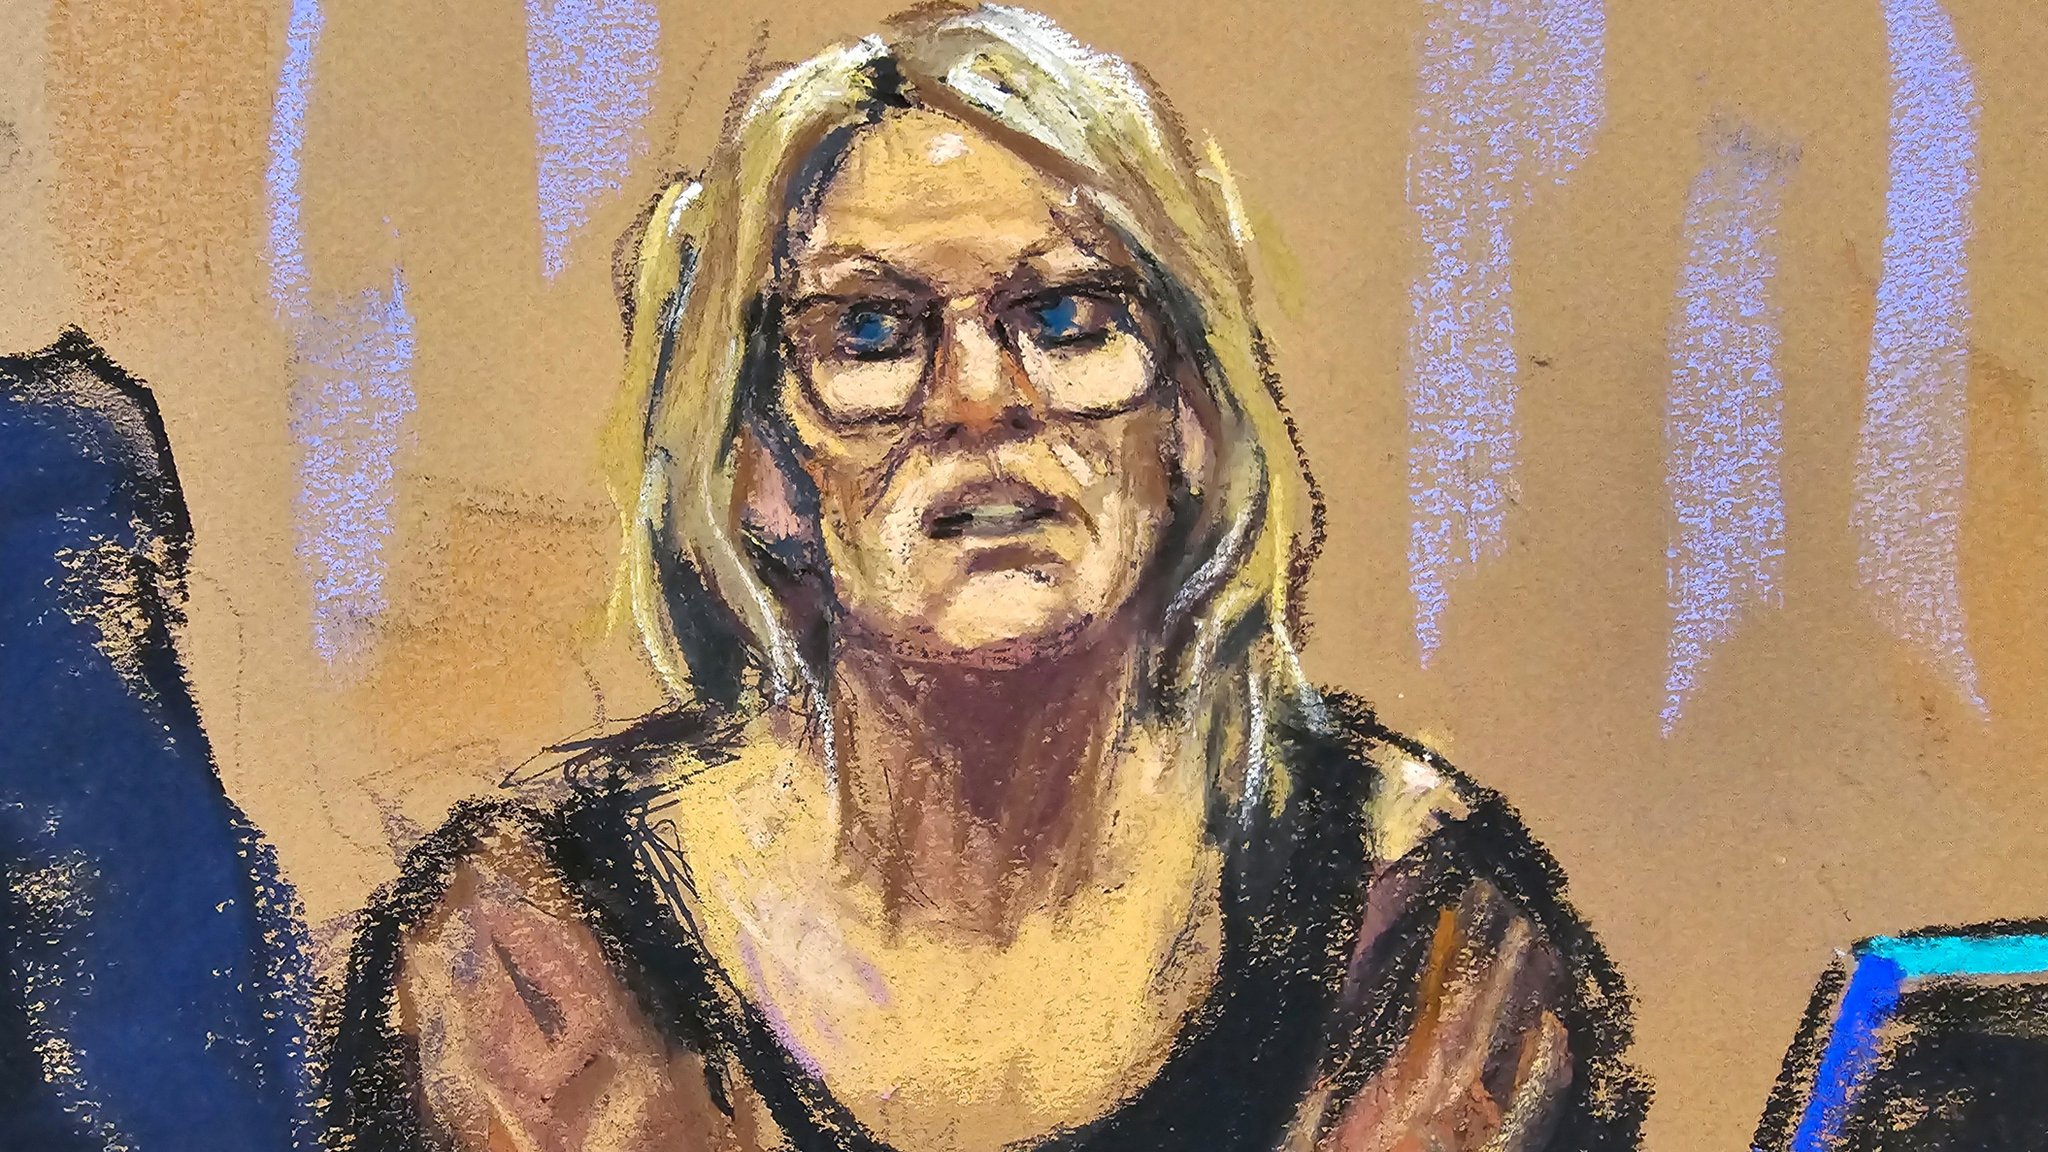 Trump trial: Stormy Daniels evidence escalates to shouting match